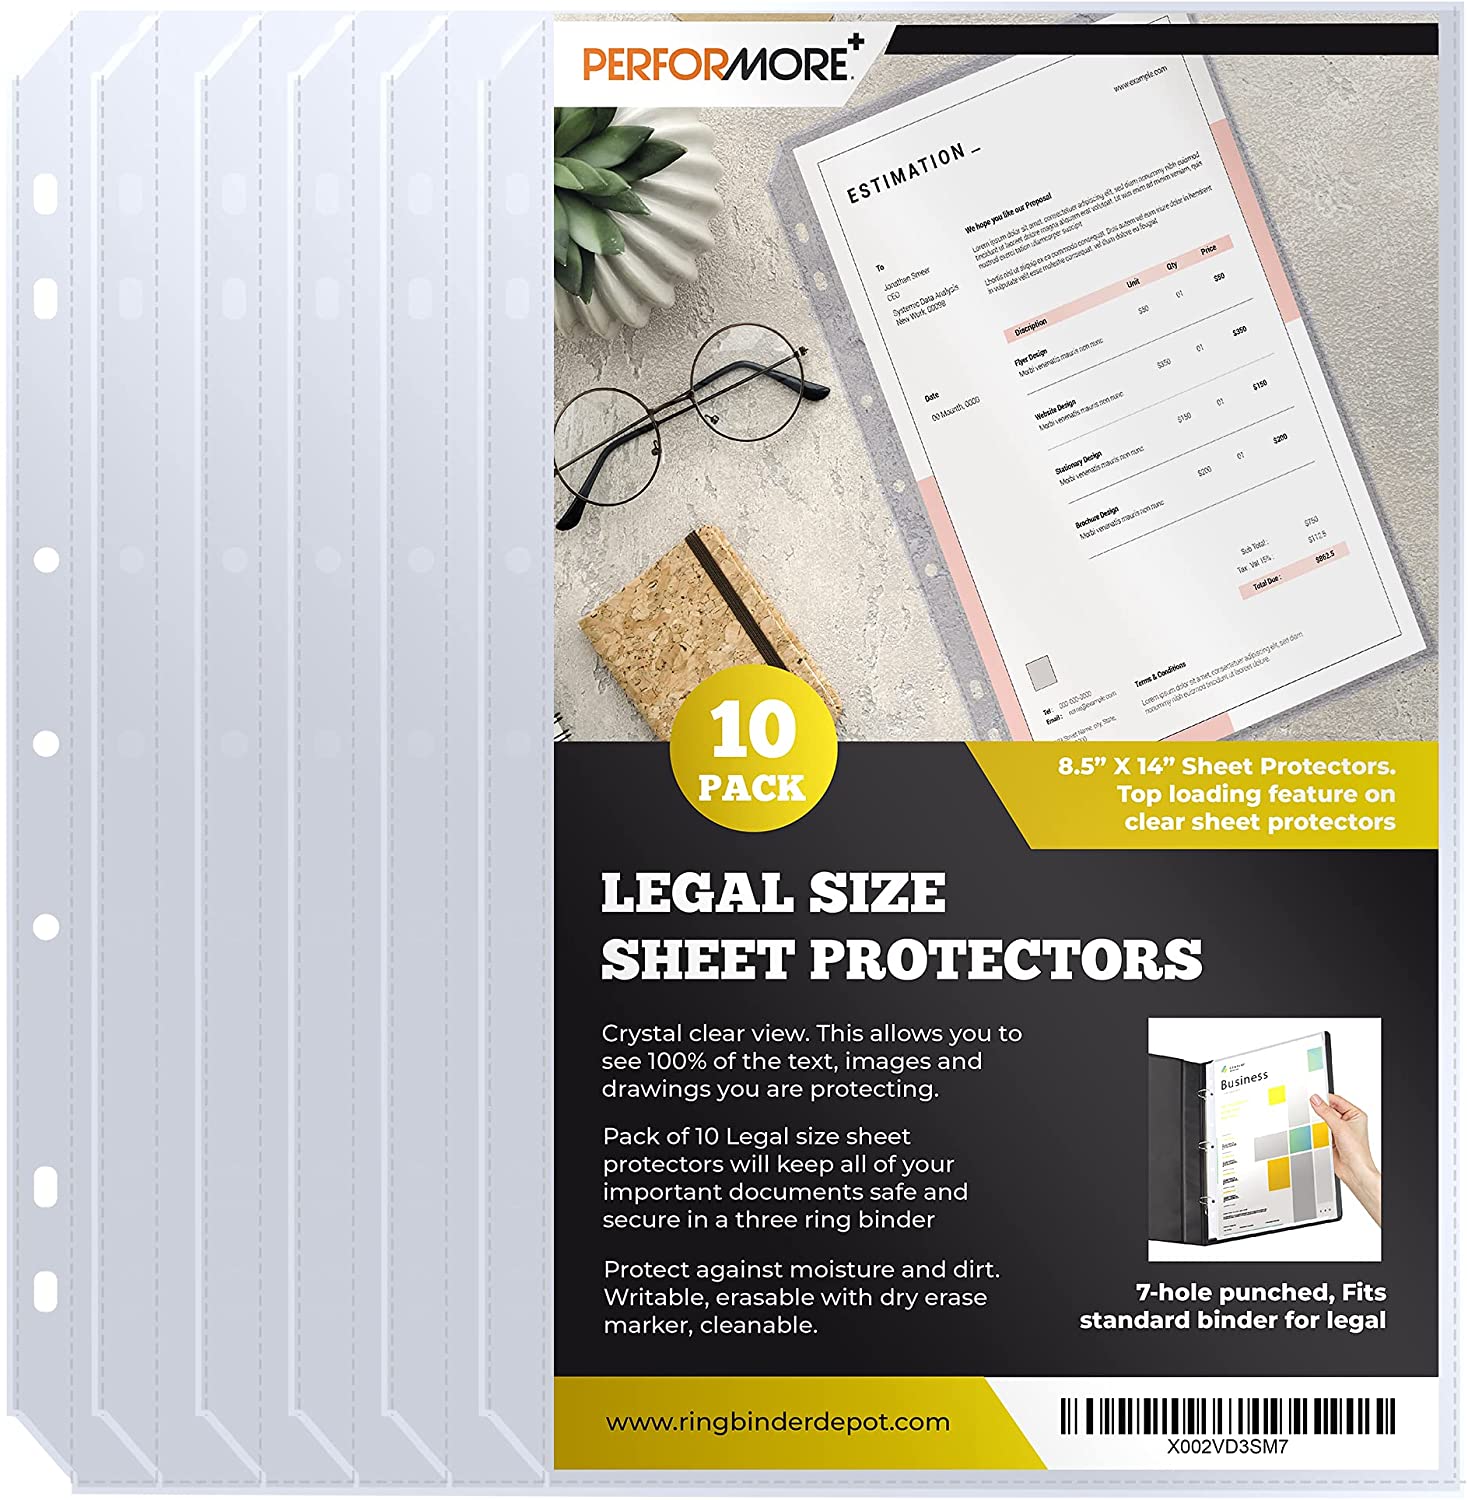 50 Sheet Protectors, Heavy Duty 8.5 X 11 Inch Clear Page Protectors for 3  Ring Binder, Plastic Sheet Sleeves, Durable Top Loading Paper Protector  with